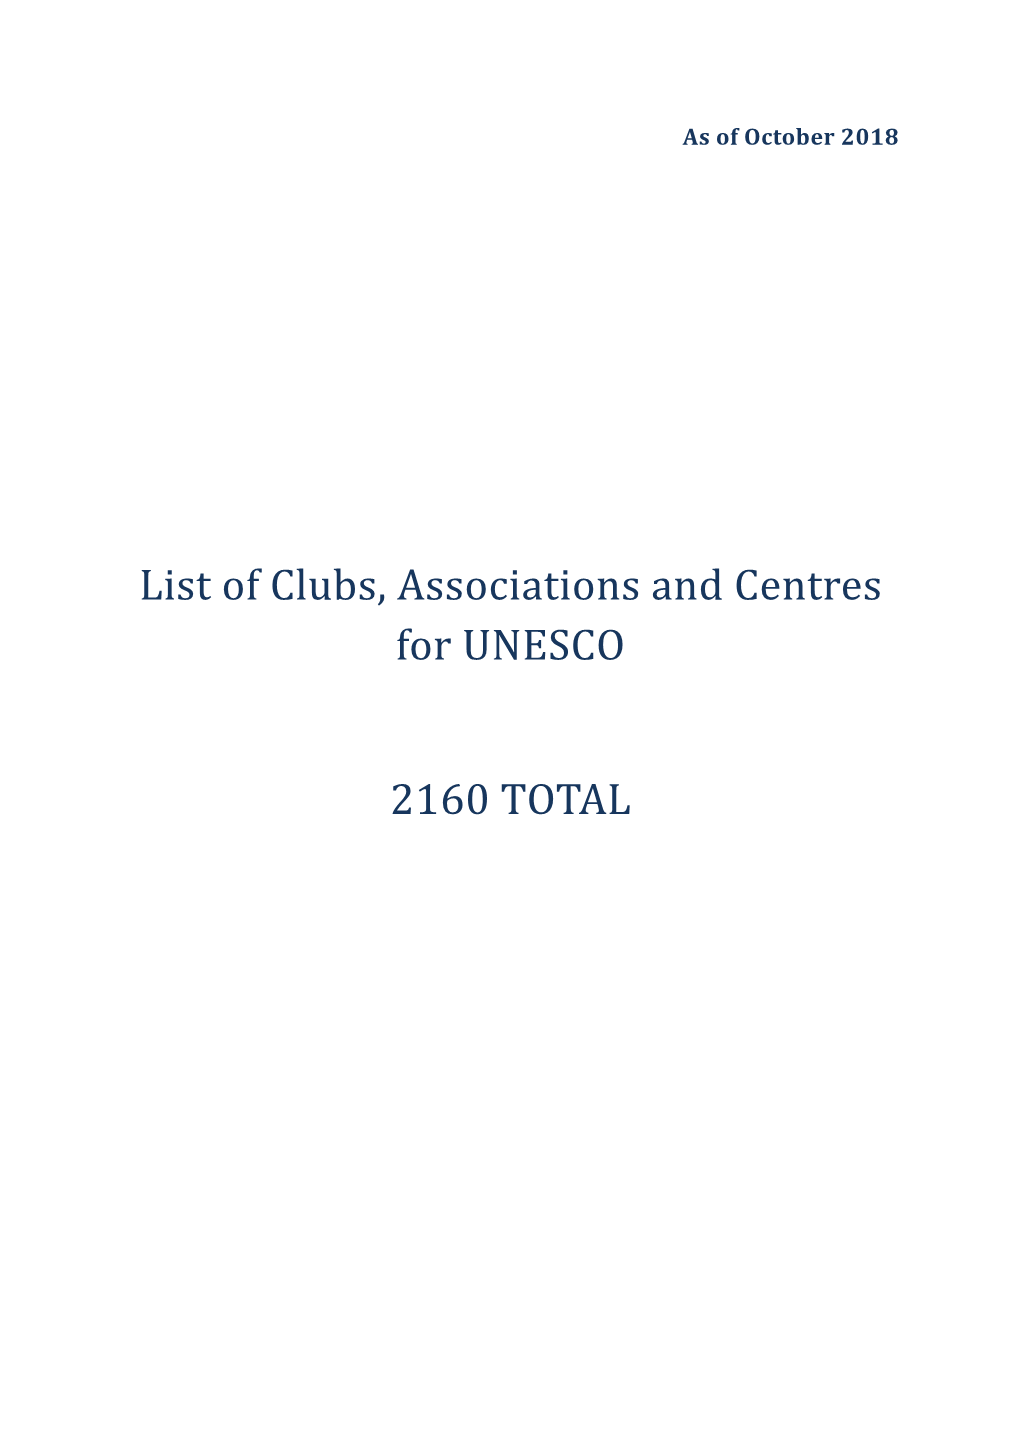 List of Clubs, Associations and Centres for UNESCO 2160 TOTAL